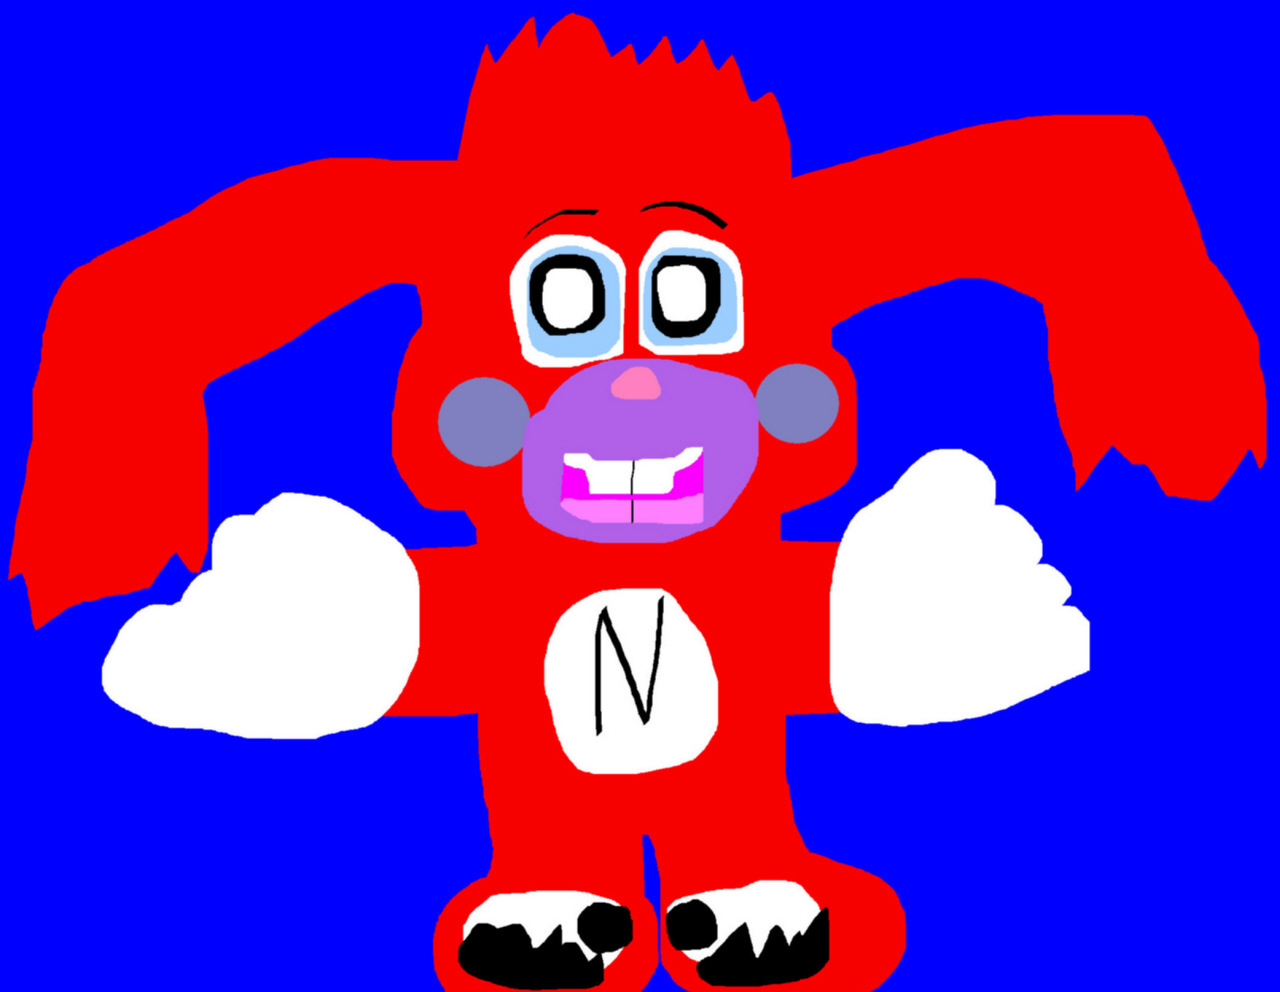 Random Popple Noid MS Paint Early B Day Gift For Scalesforsales by Falconlobo